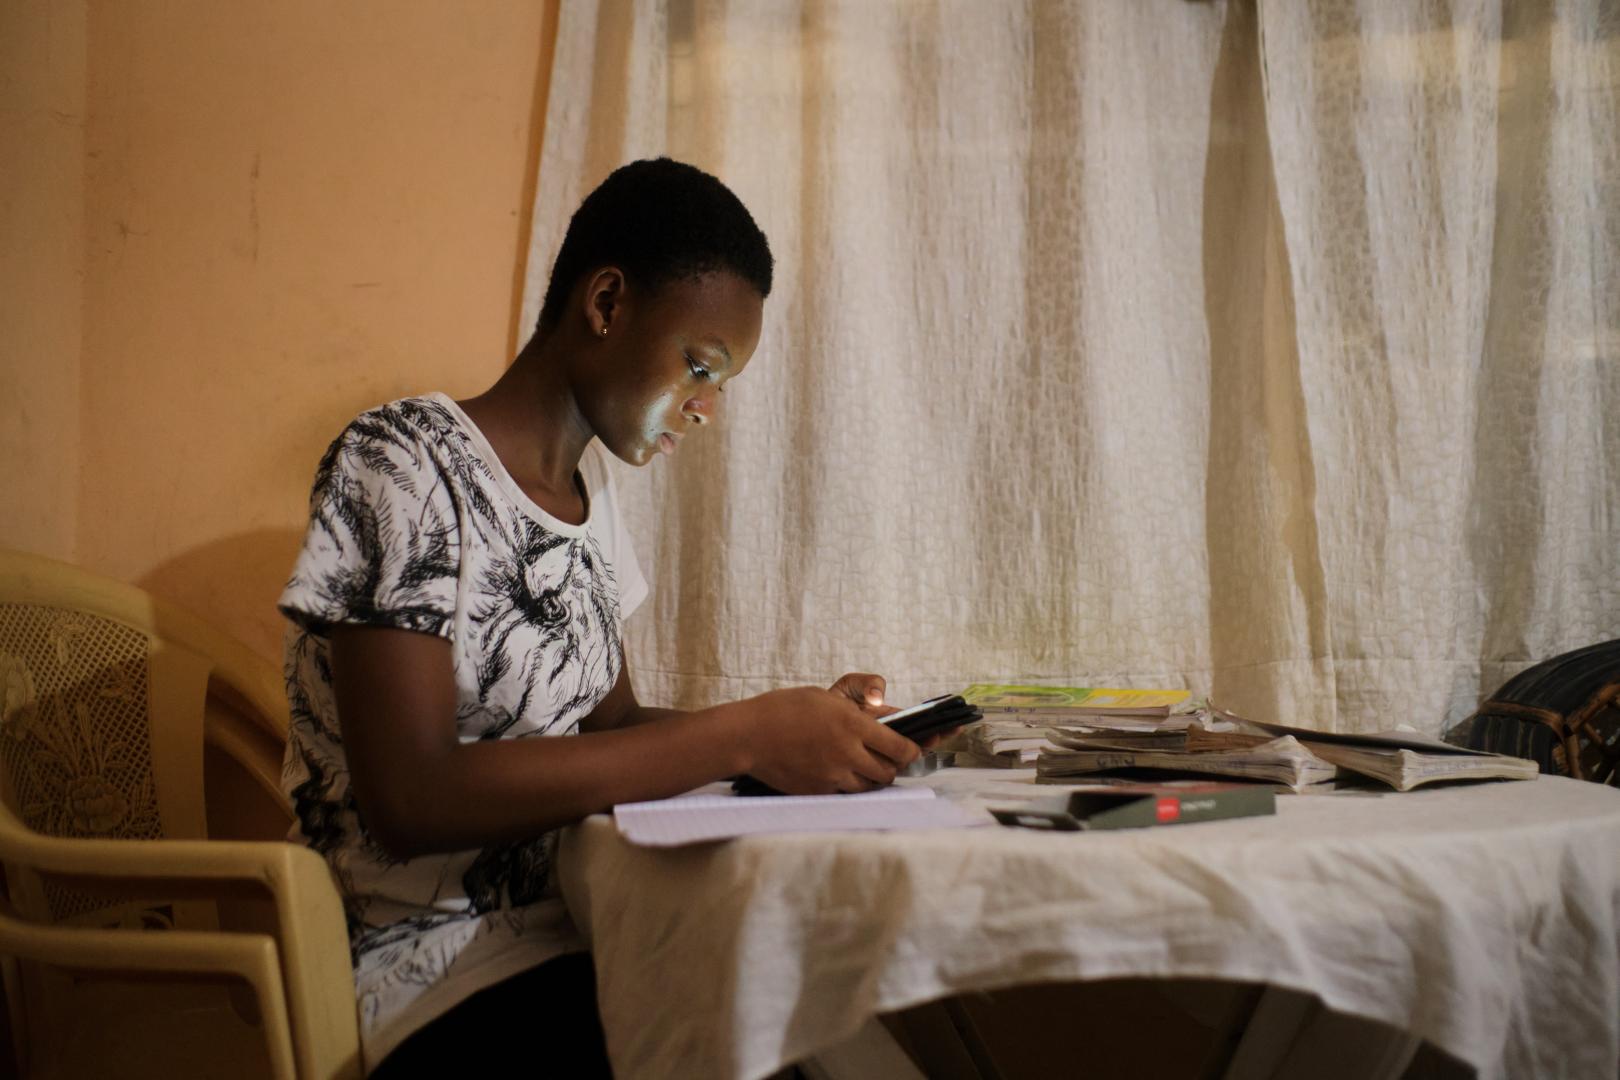 Wendy, 14, studies from home. She receives her lessons through the internet